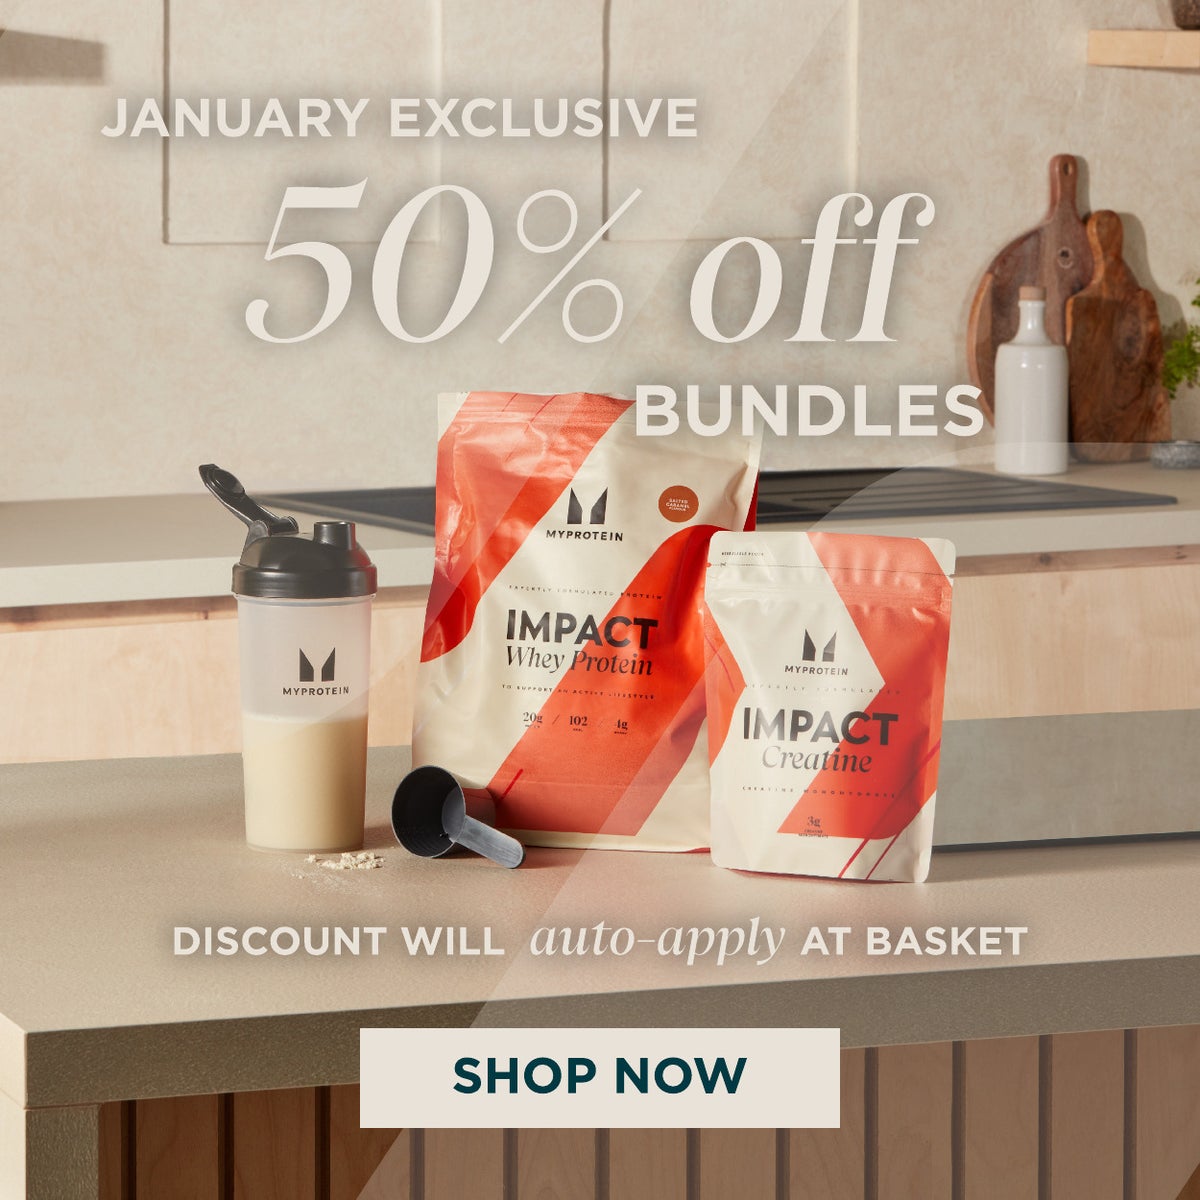 50% off Bundles. Discount will auto apply at basket.